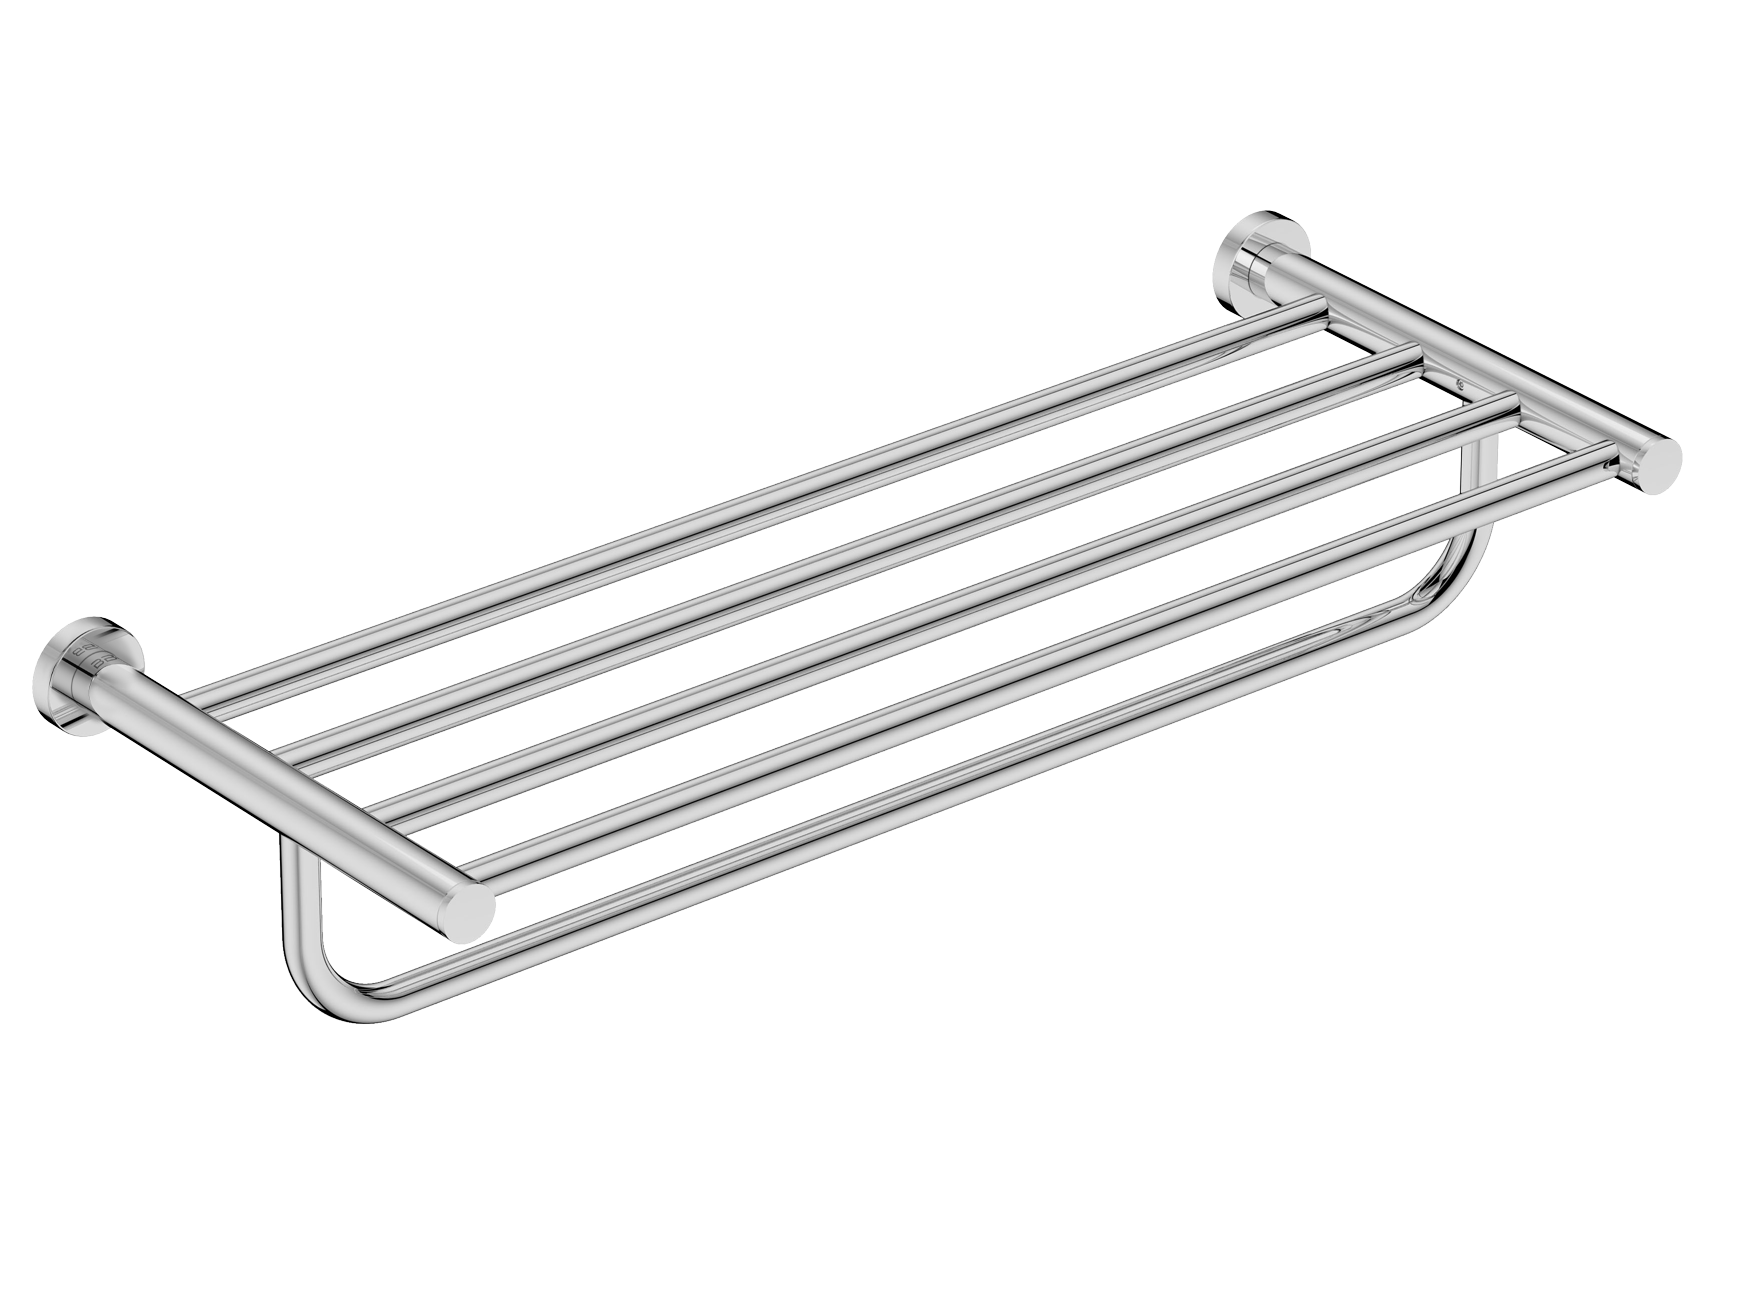 Polished stainless steel shower rack. 